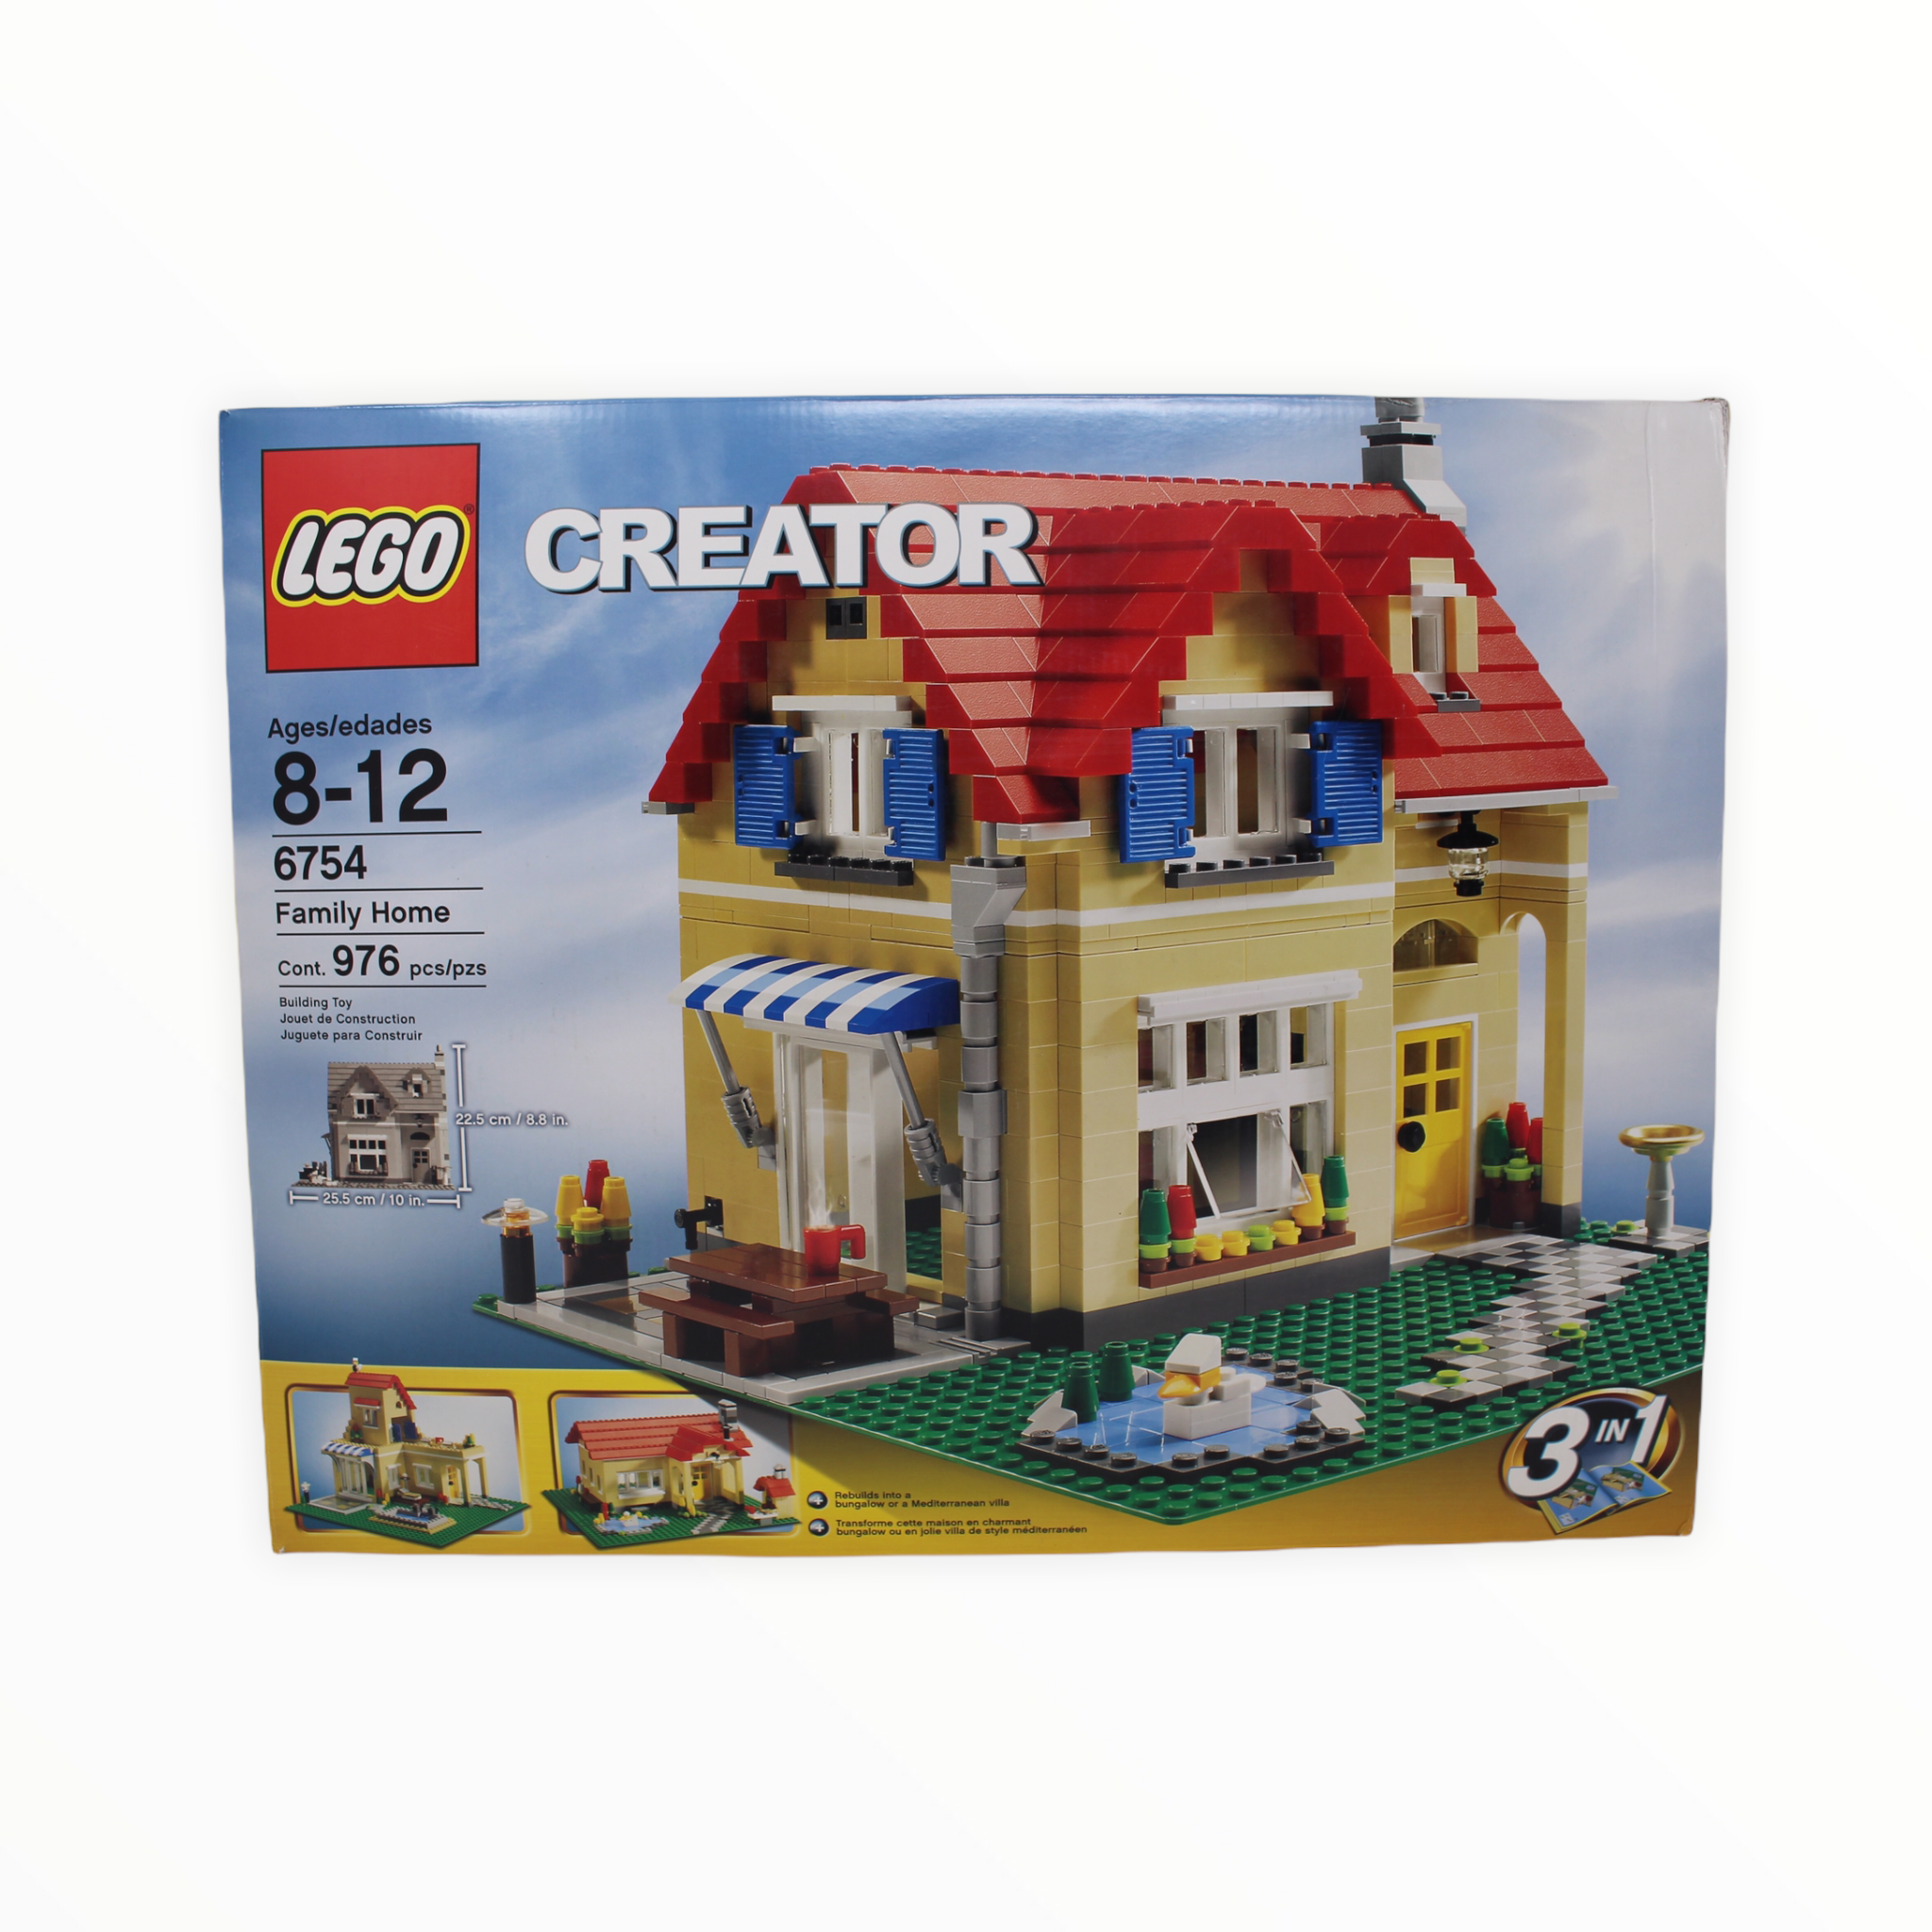 Certified Used Set 6754 Creator Family Home